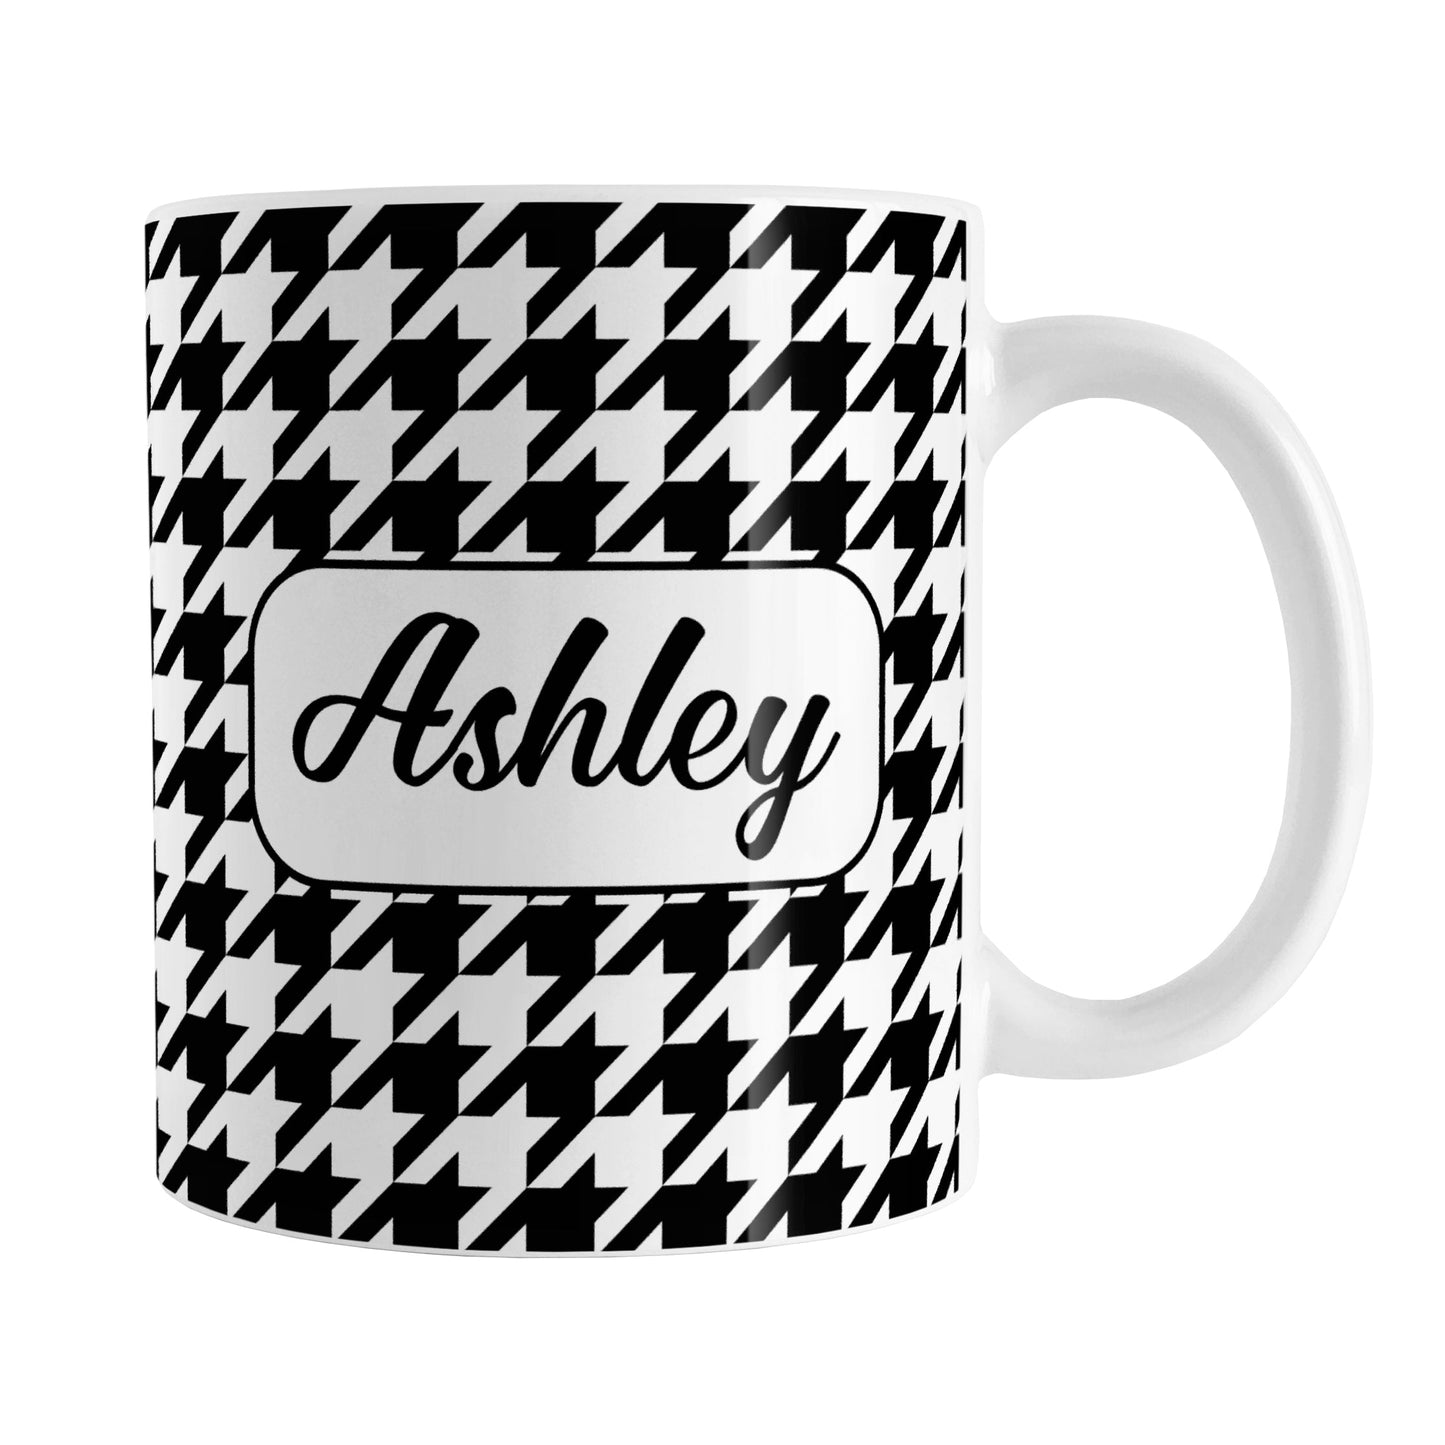 Personalized Black and White Houndstooth Mug (11oz) at Amy's Coffee Mugs